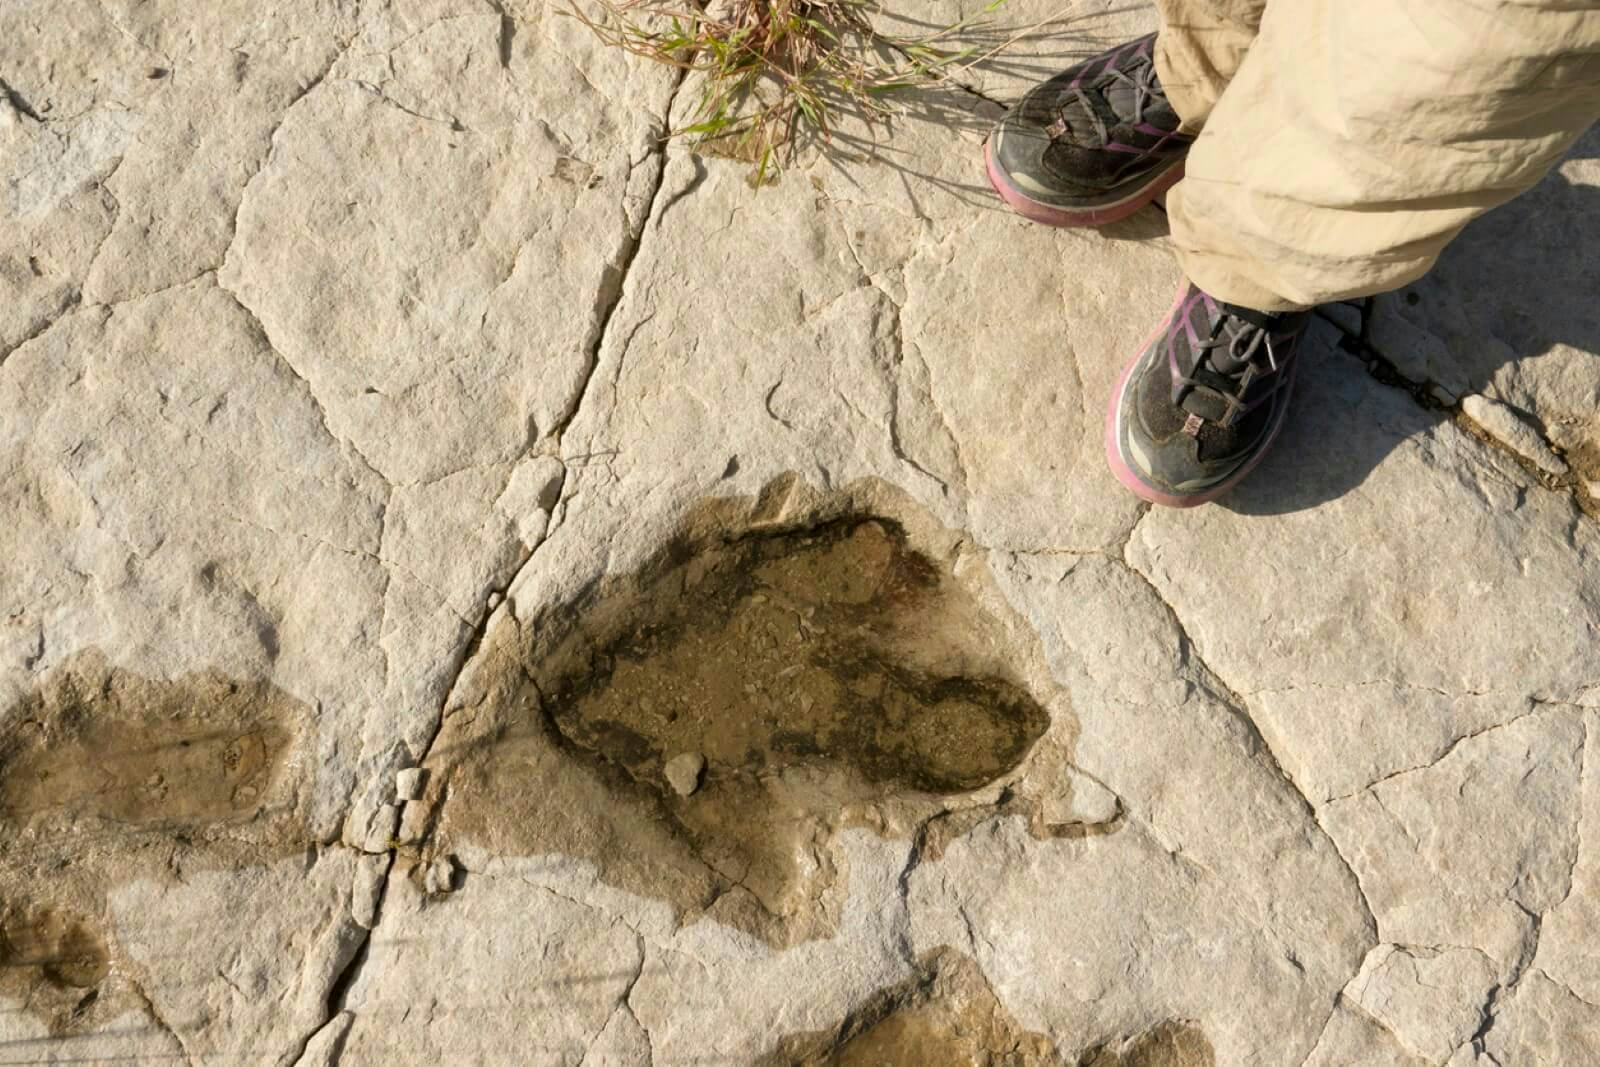 Bipedal dinosaur footprints at Picketwire Canyon Trackway in Colorado